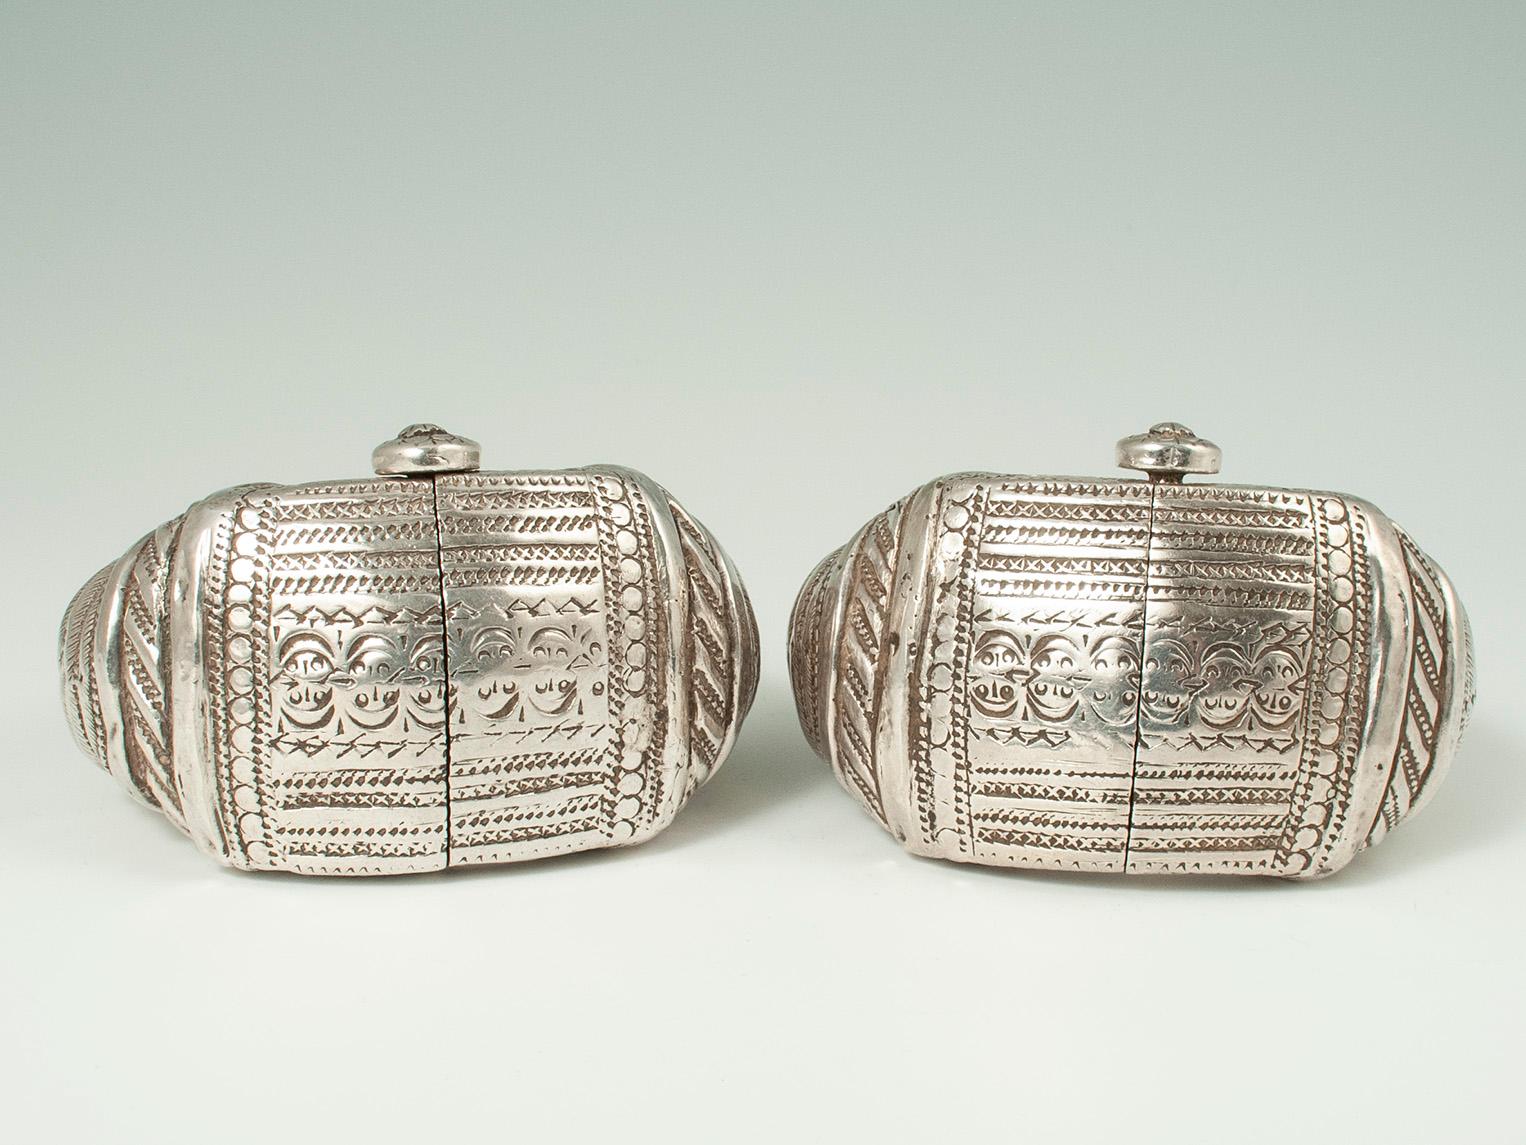 Late 19th to early 20th century silver Anklets, Oman

These silver anklets were fashioned in India for the Omani market. Made of repousse silver over a wood frame, they open with a central screw pin. This pair is in wonderful worn condition - an